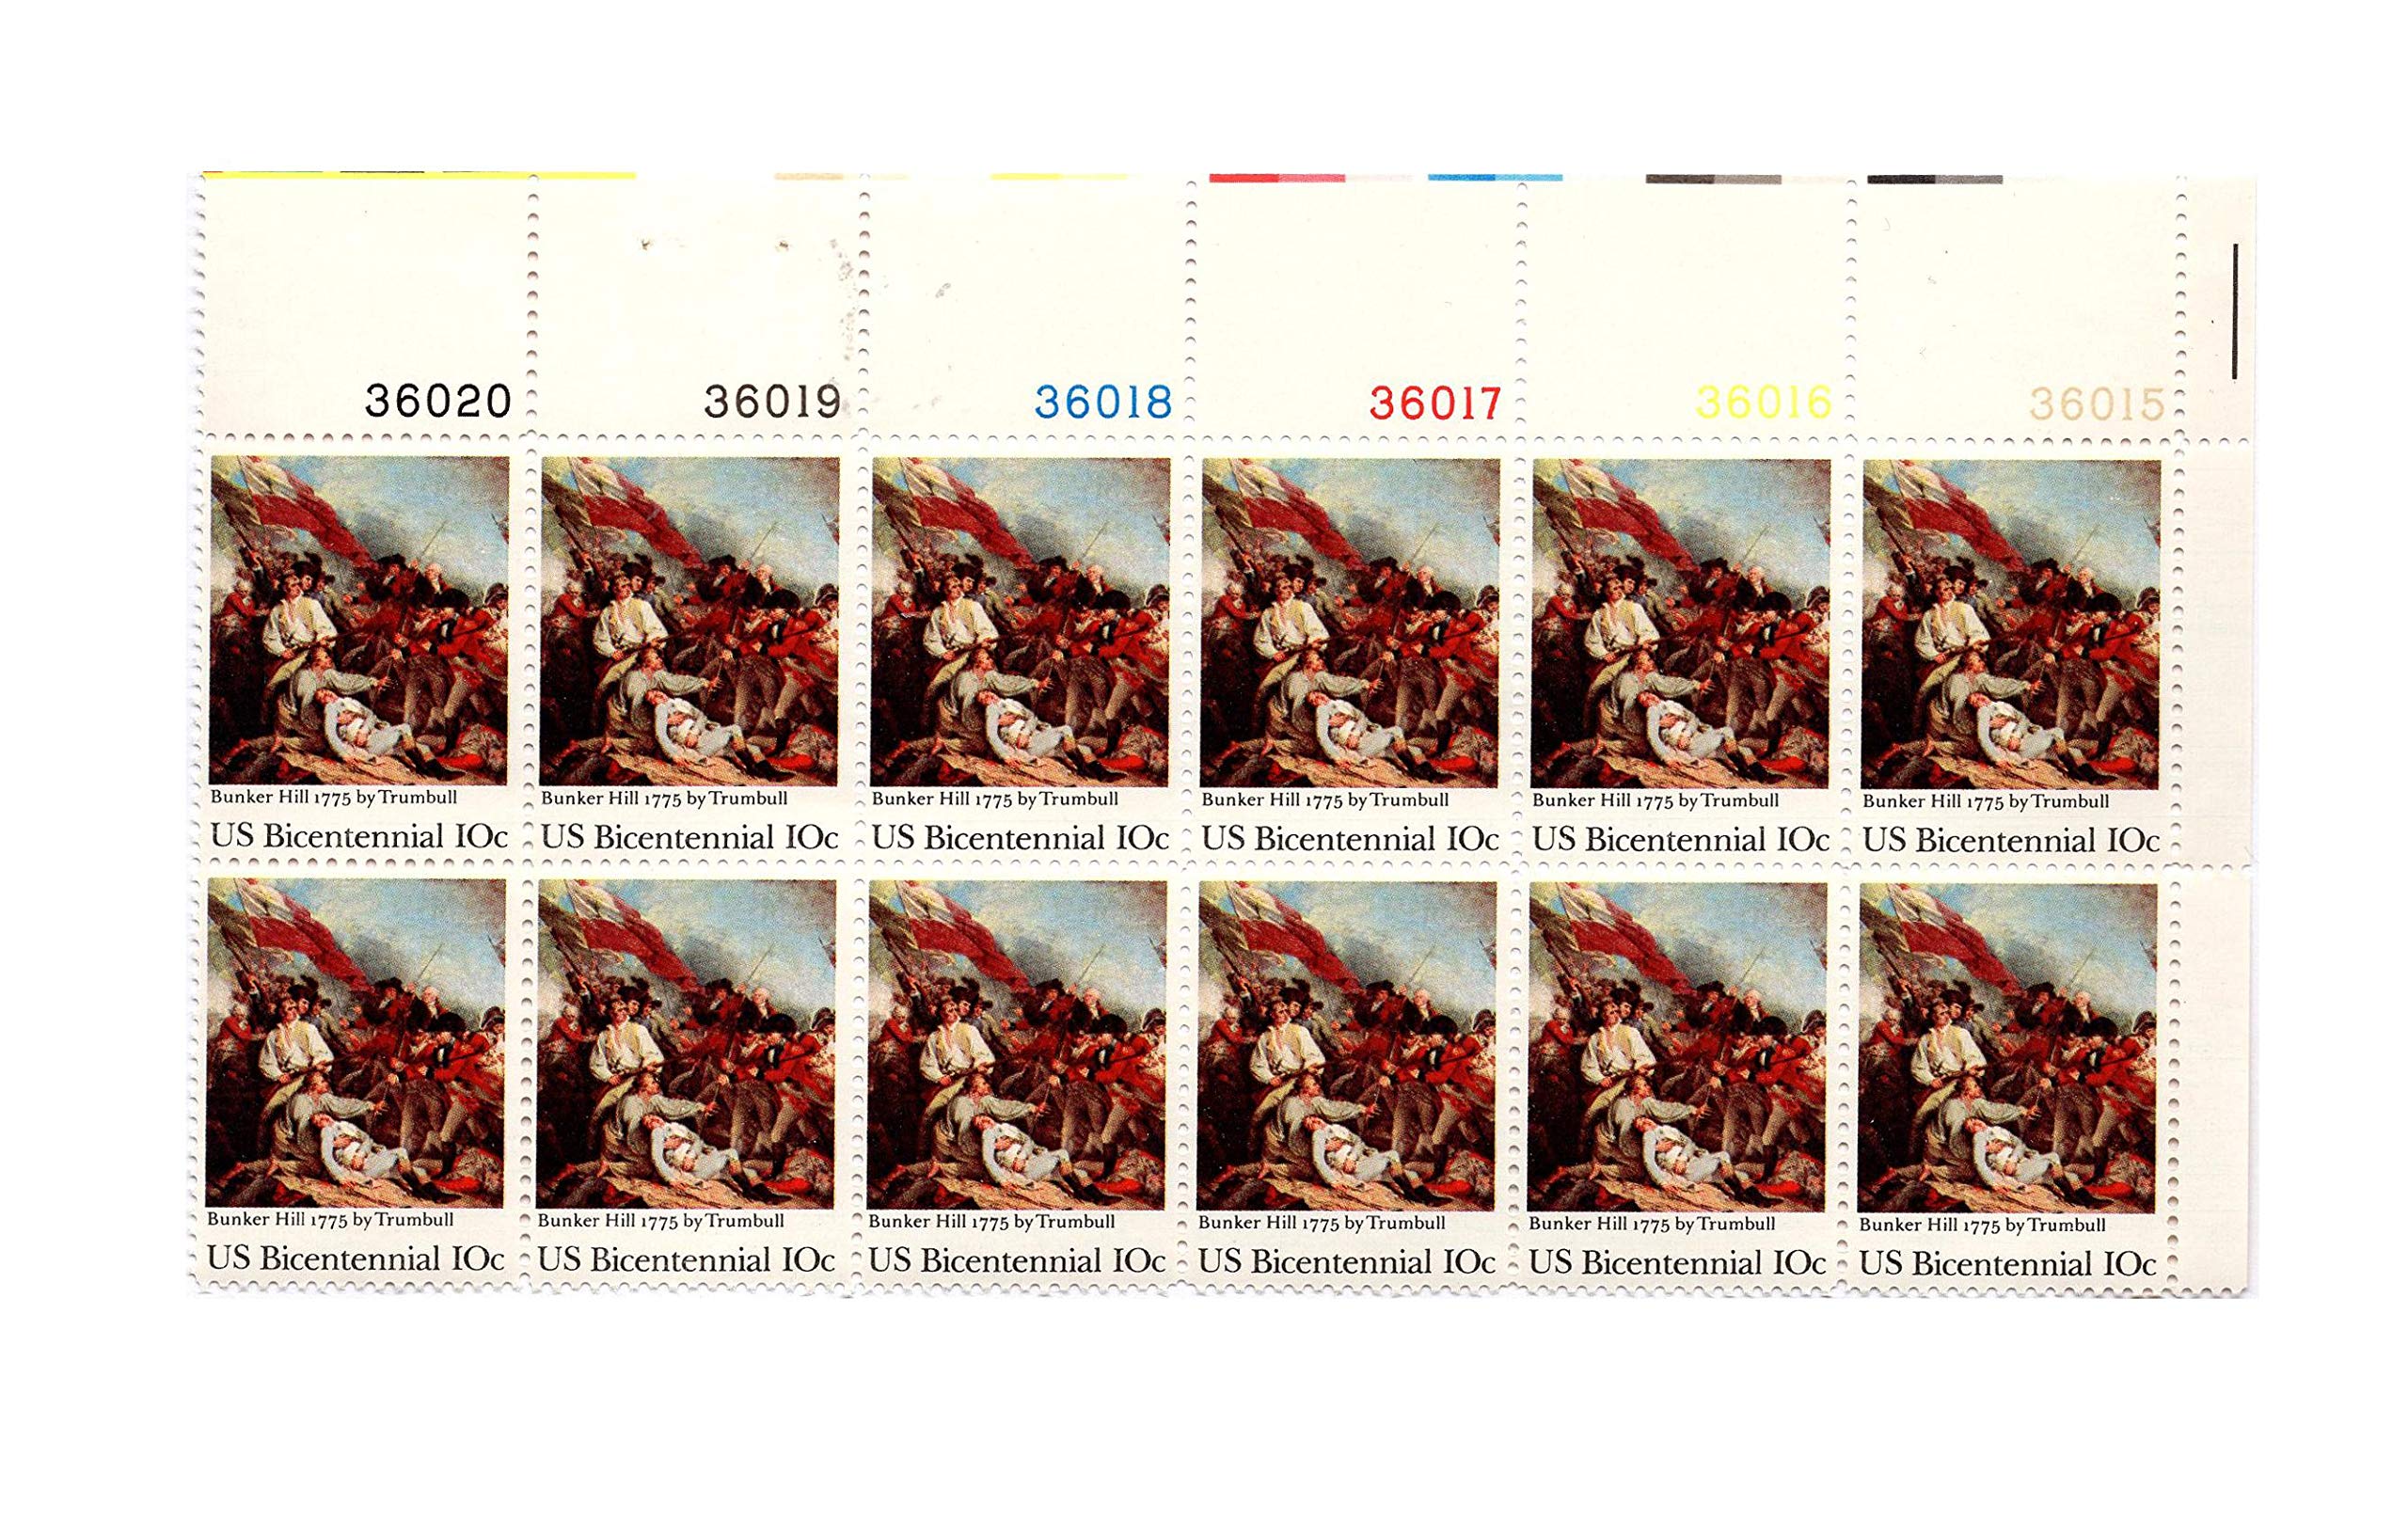 US 1975 Postal Stamps, Battle of Bunker Hill, S# 1564, PB of 12 10 Cent Stamps